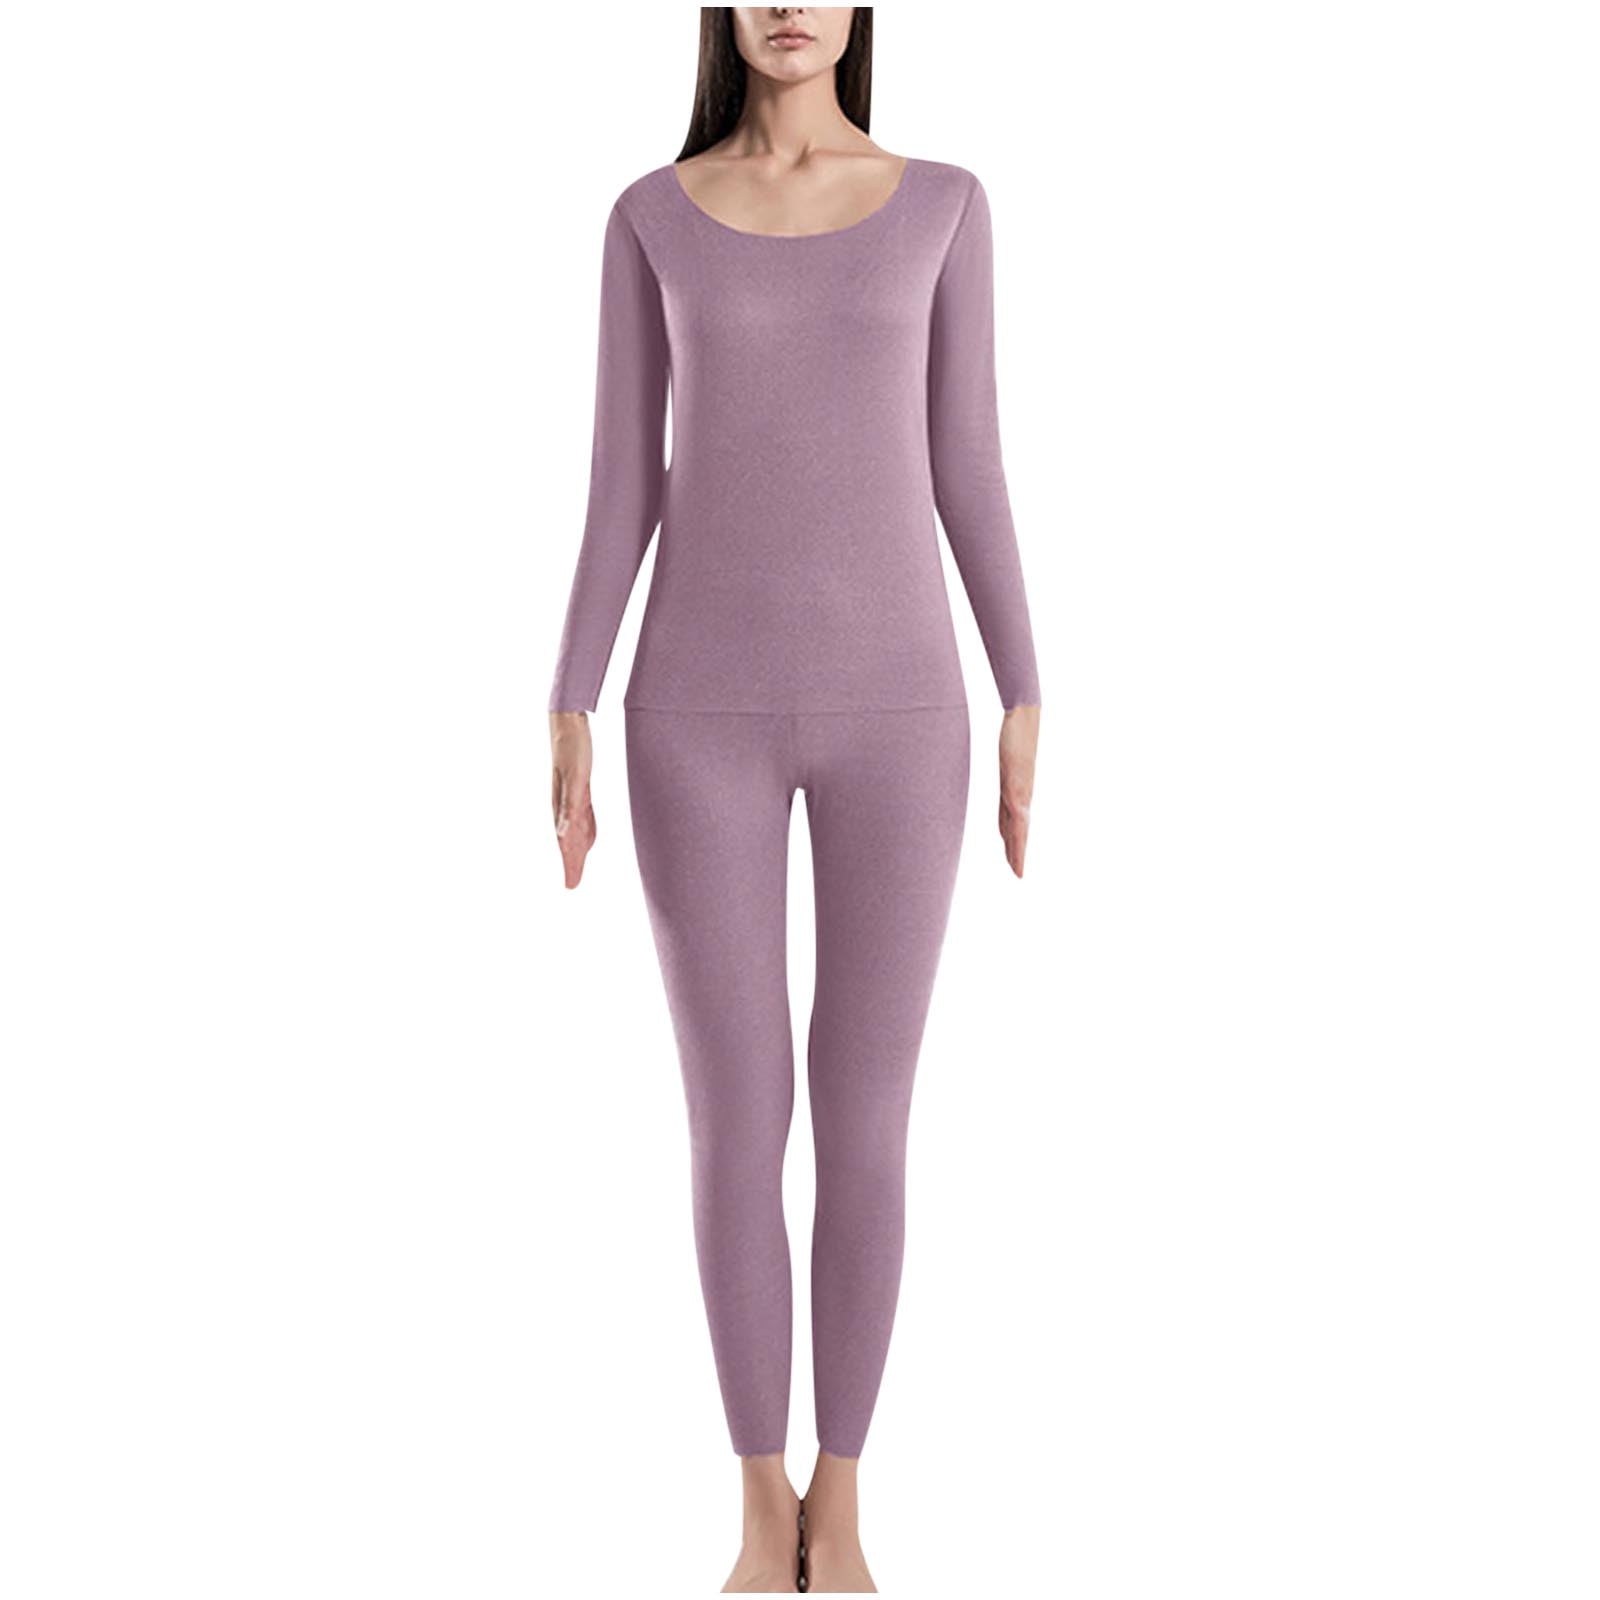 Long sleeve workout tops for women Women's Winter Thermal Underwear Woolen  Thermal Suit Clothes Trousers Long Sleeved Round Neck Shirt/Shirt Suit  lounge sport coat 